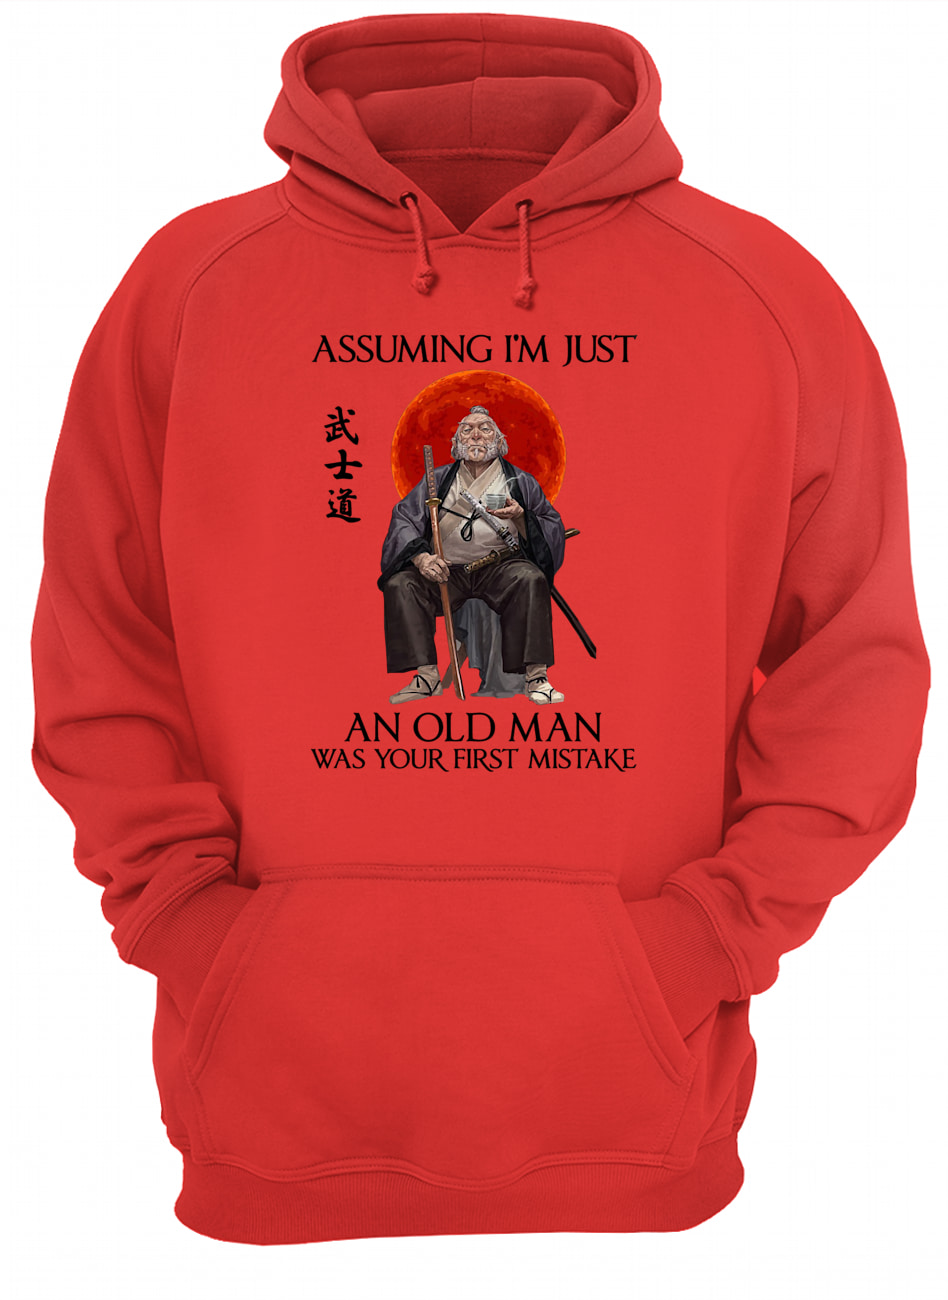 Assuming i'm just an old man was your first mistake samurai hoodie